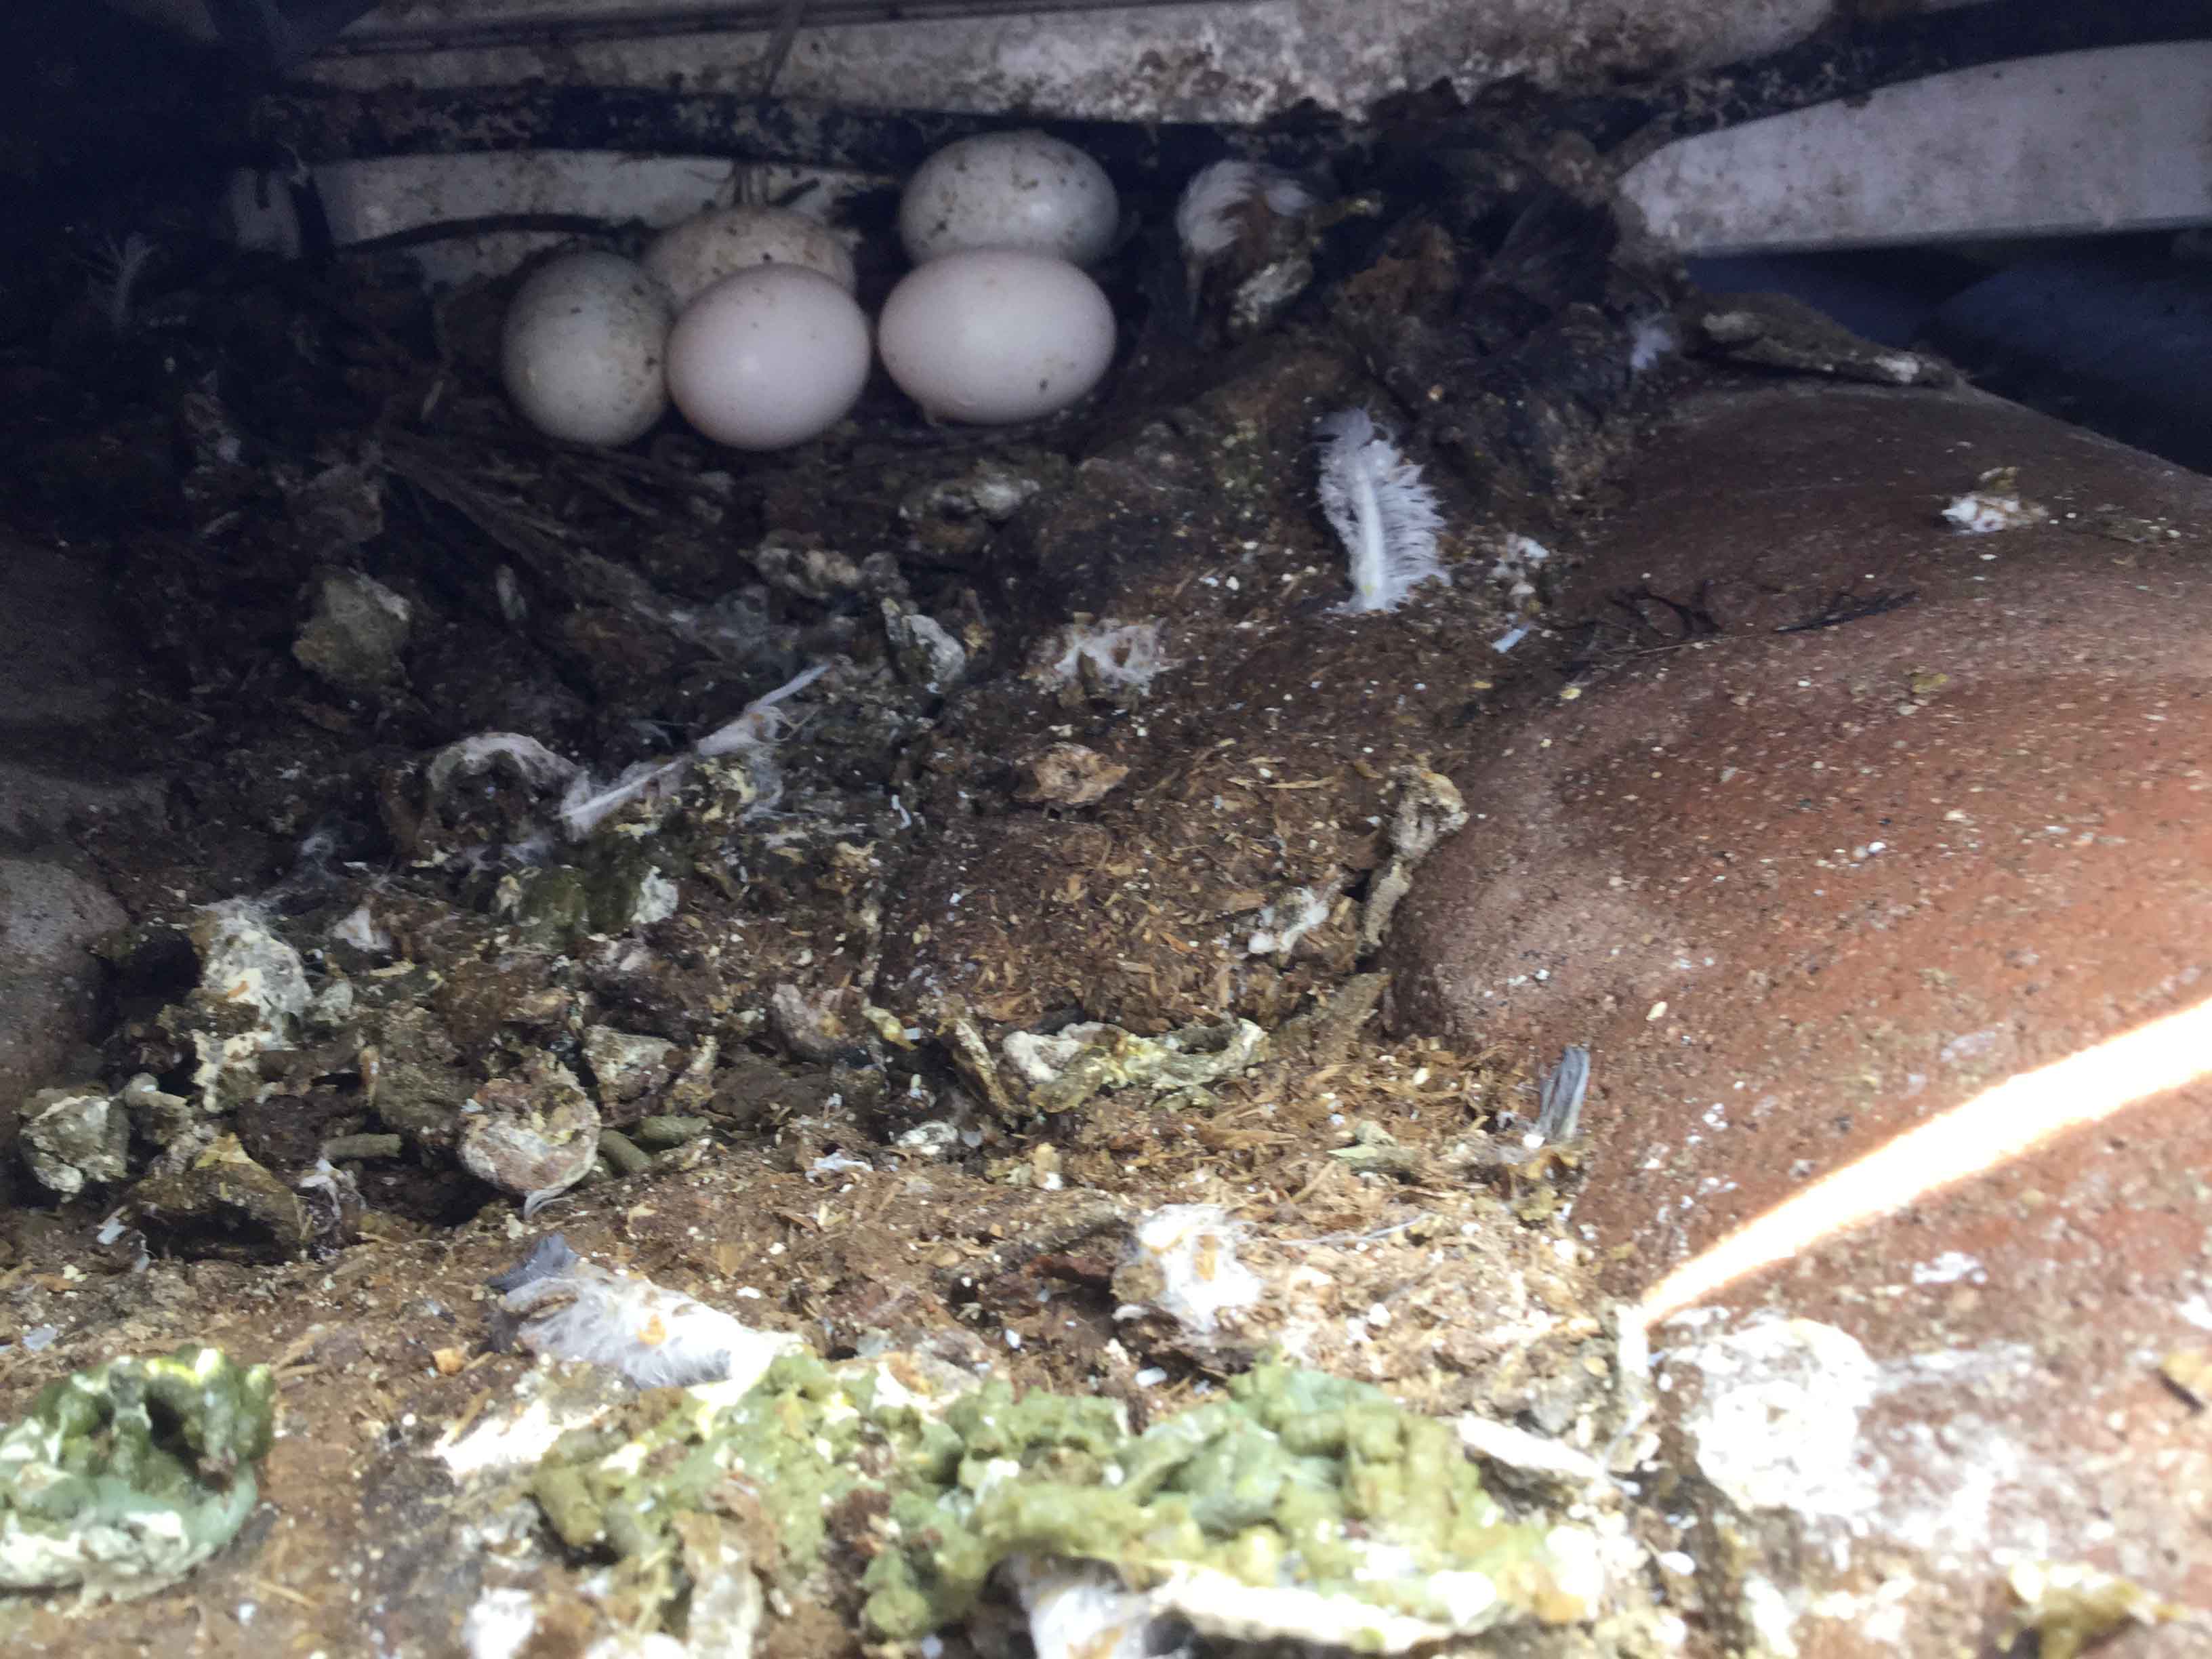 nesting debris and pigeon droppings under solar panel